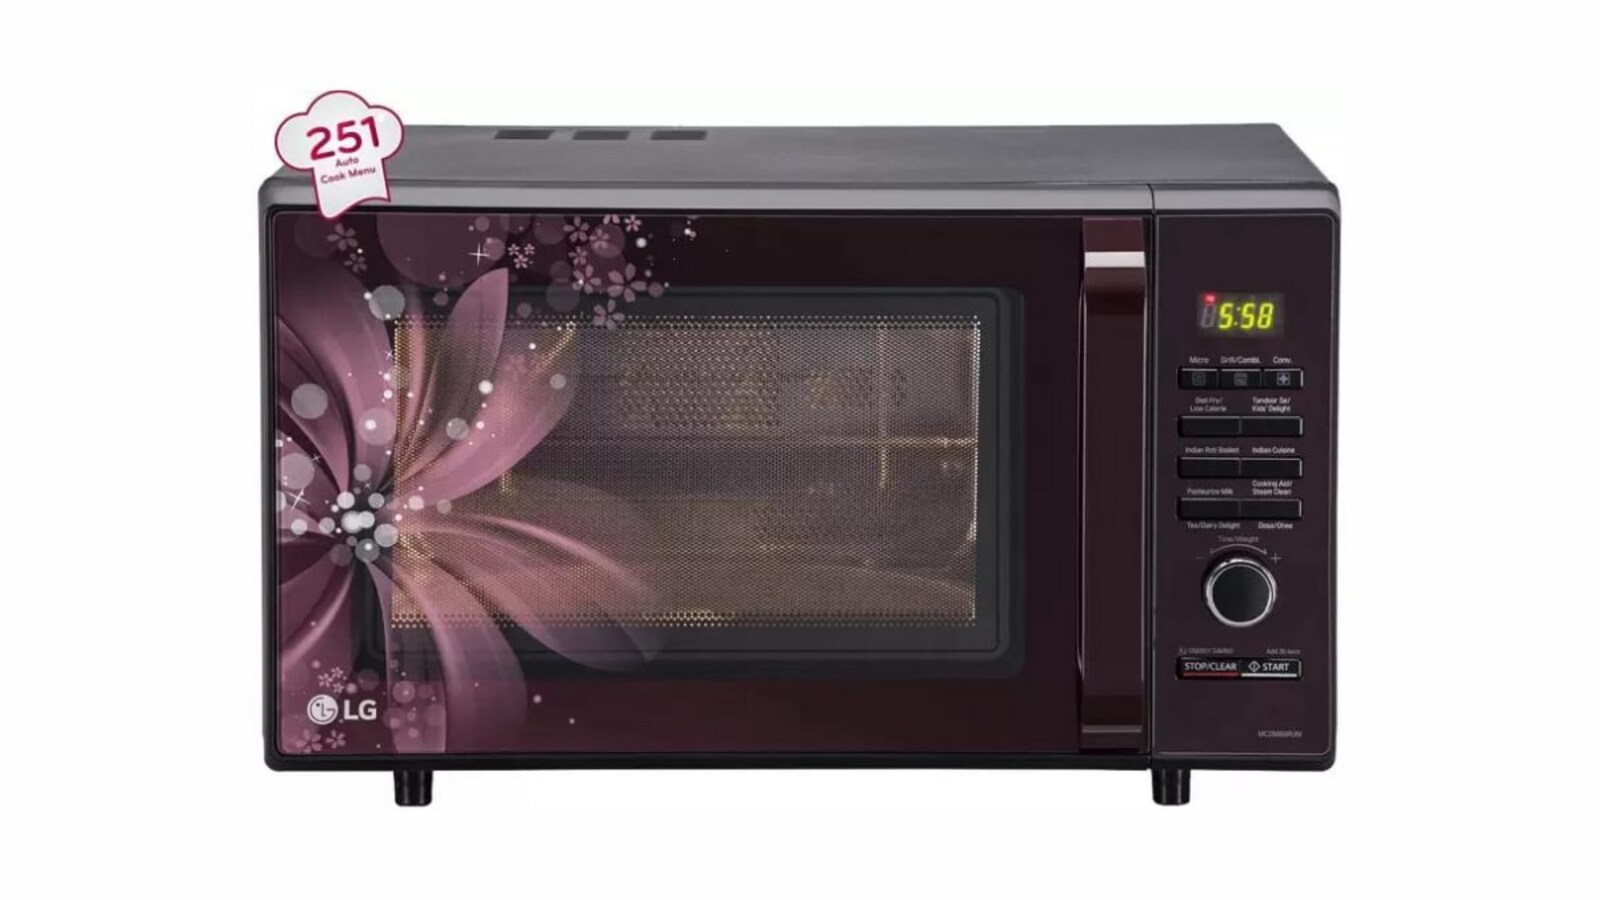 godrej-to-samsung-here-are-5-top-microwave-ovens-available-with-up-to-47-discount-on-flipkart